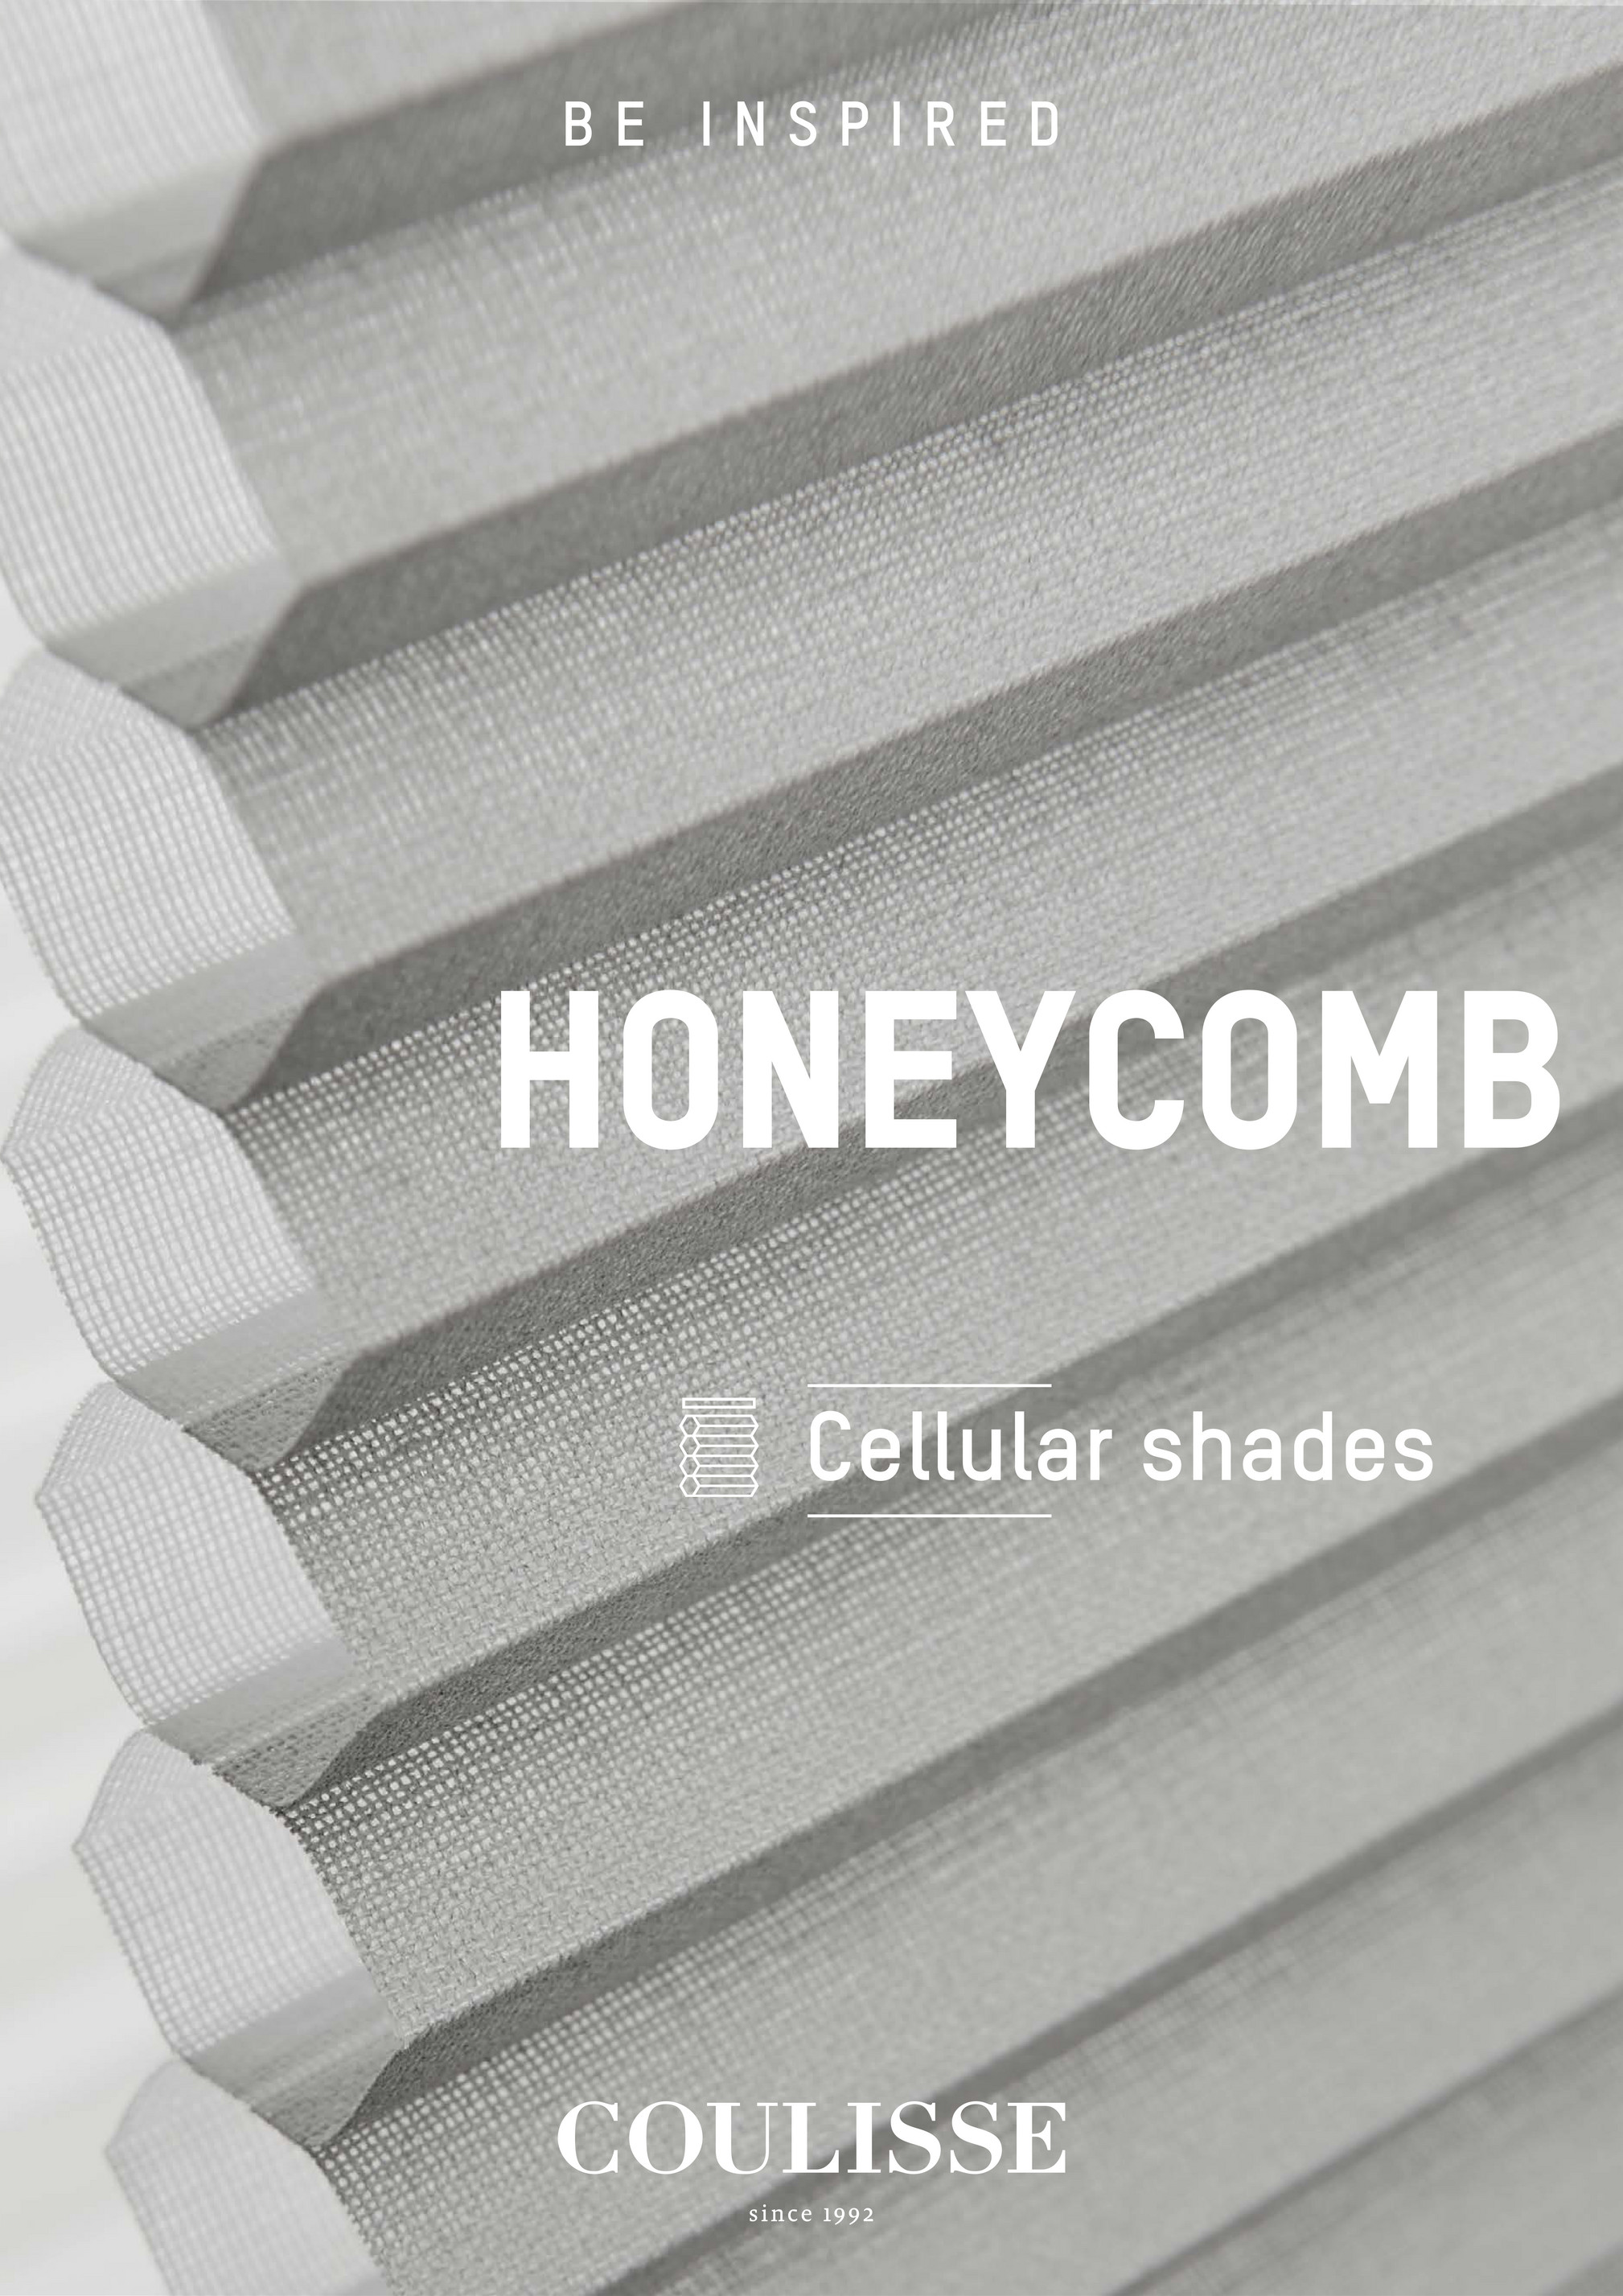 Coulisse - Honeycomb Page - USA 1 Collection